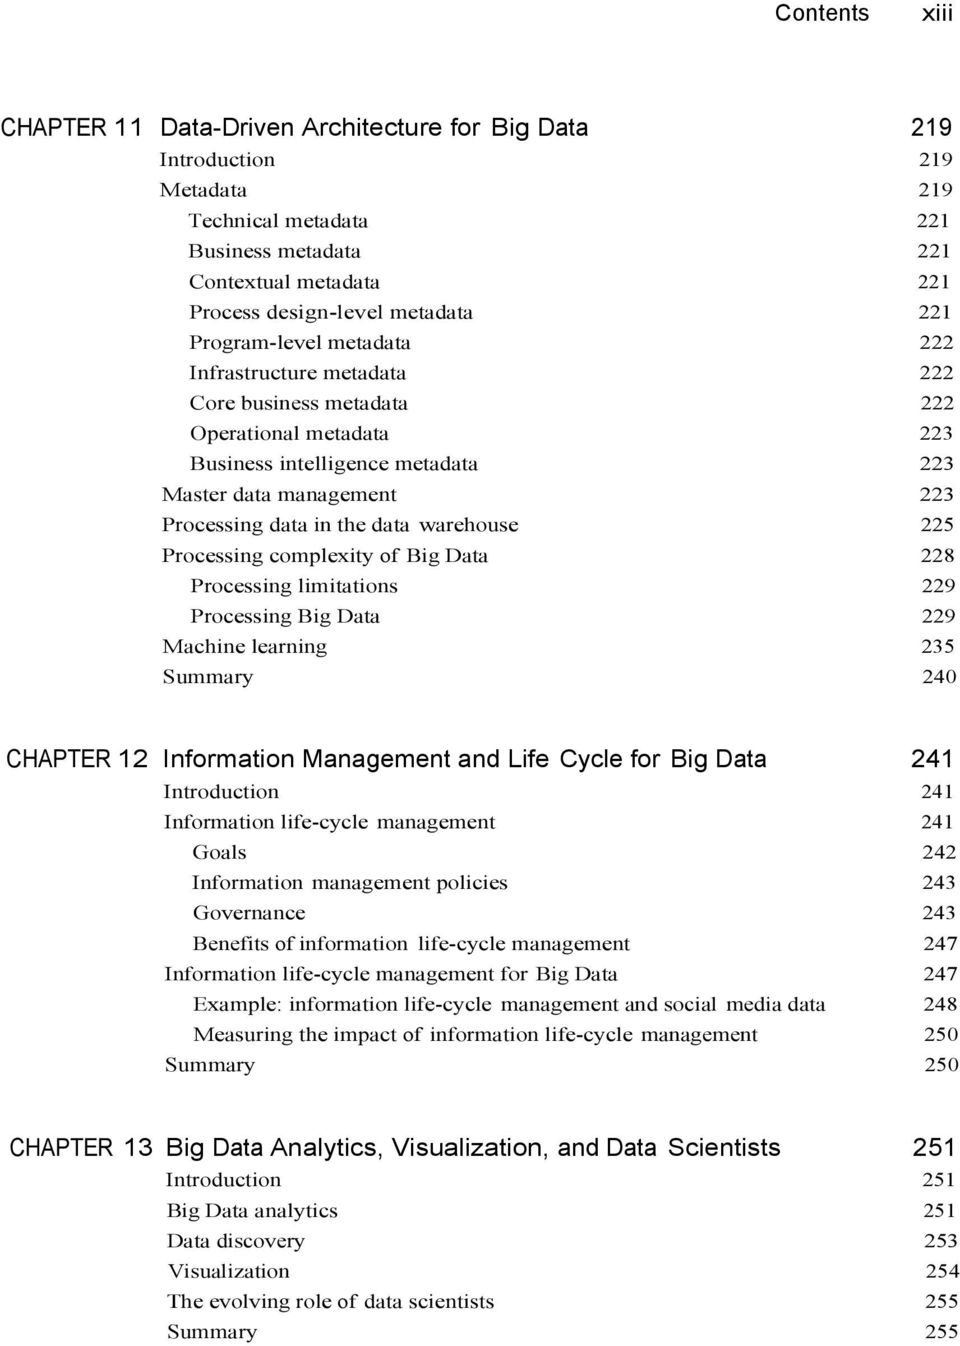 warehouse 225 Processing complexity of Big Data 228 Processing limitations 229 Processing Big Data 229 Machine learning 235 Summary 240 CHAPTER 12 Information Management and Life Cycle for Big Data